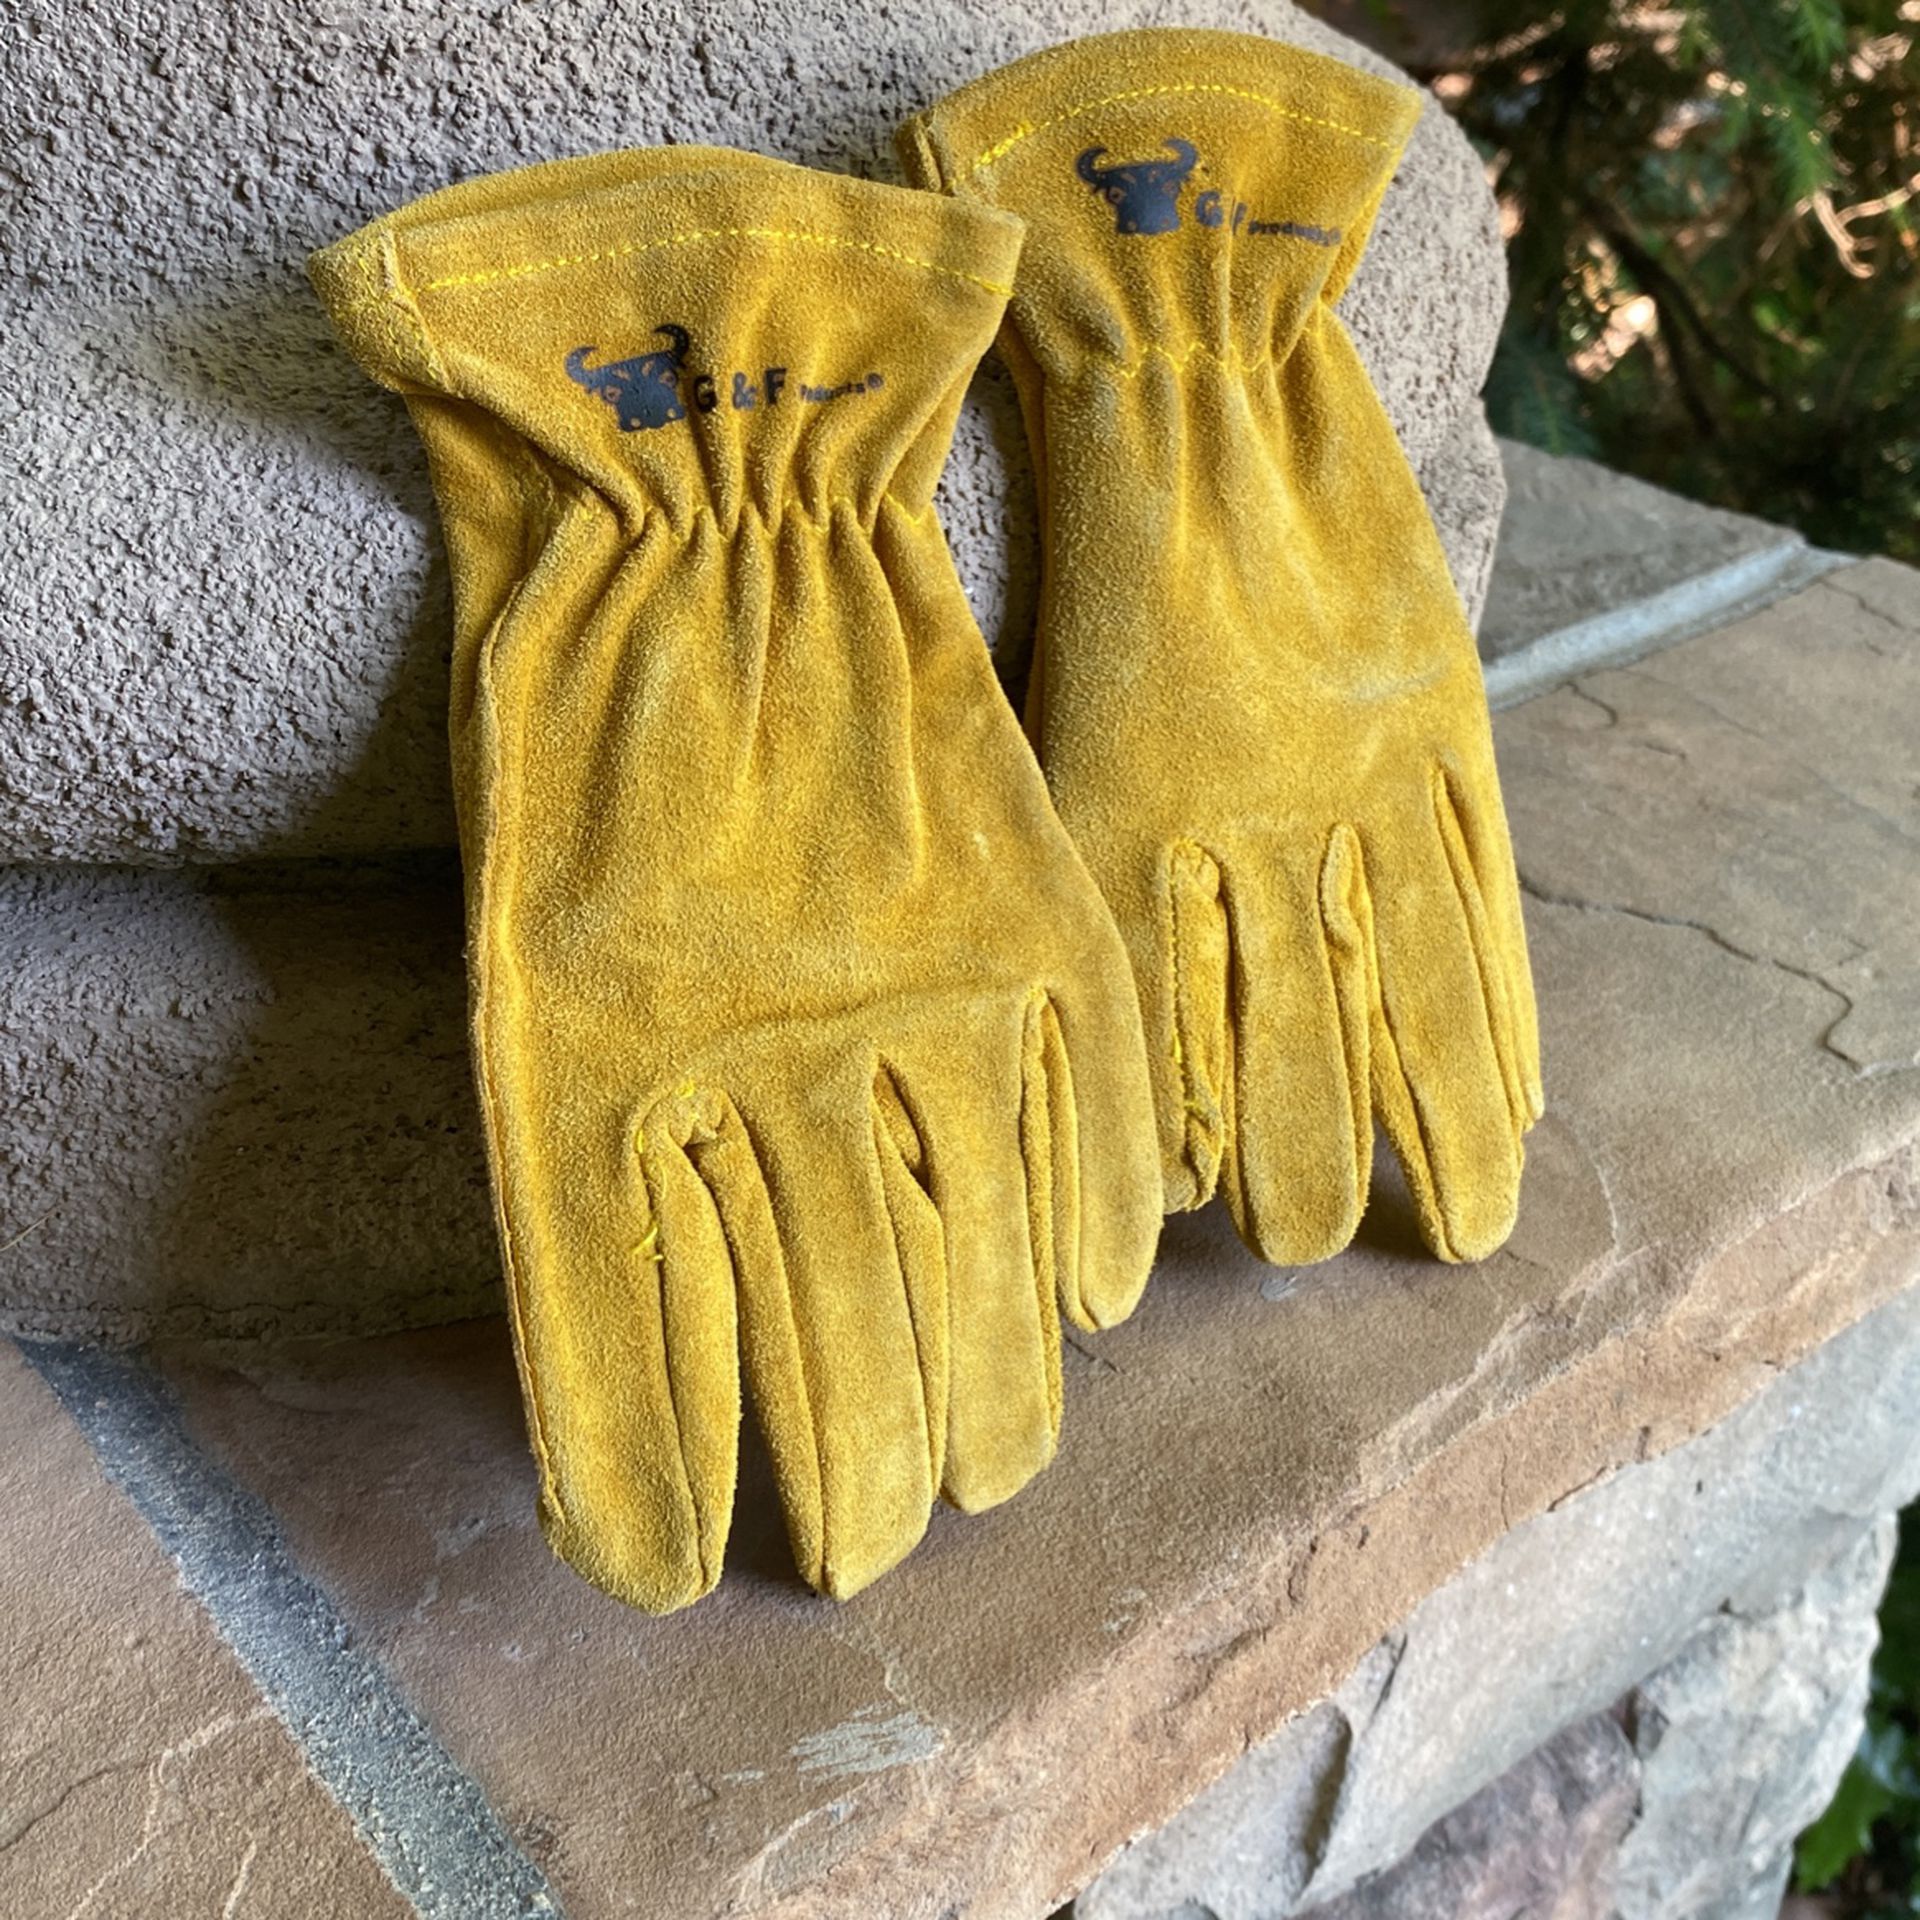 High Quality G&F Products, Leather Gloves- Almost Brand New